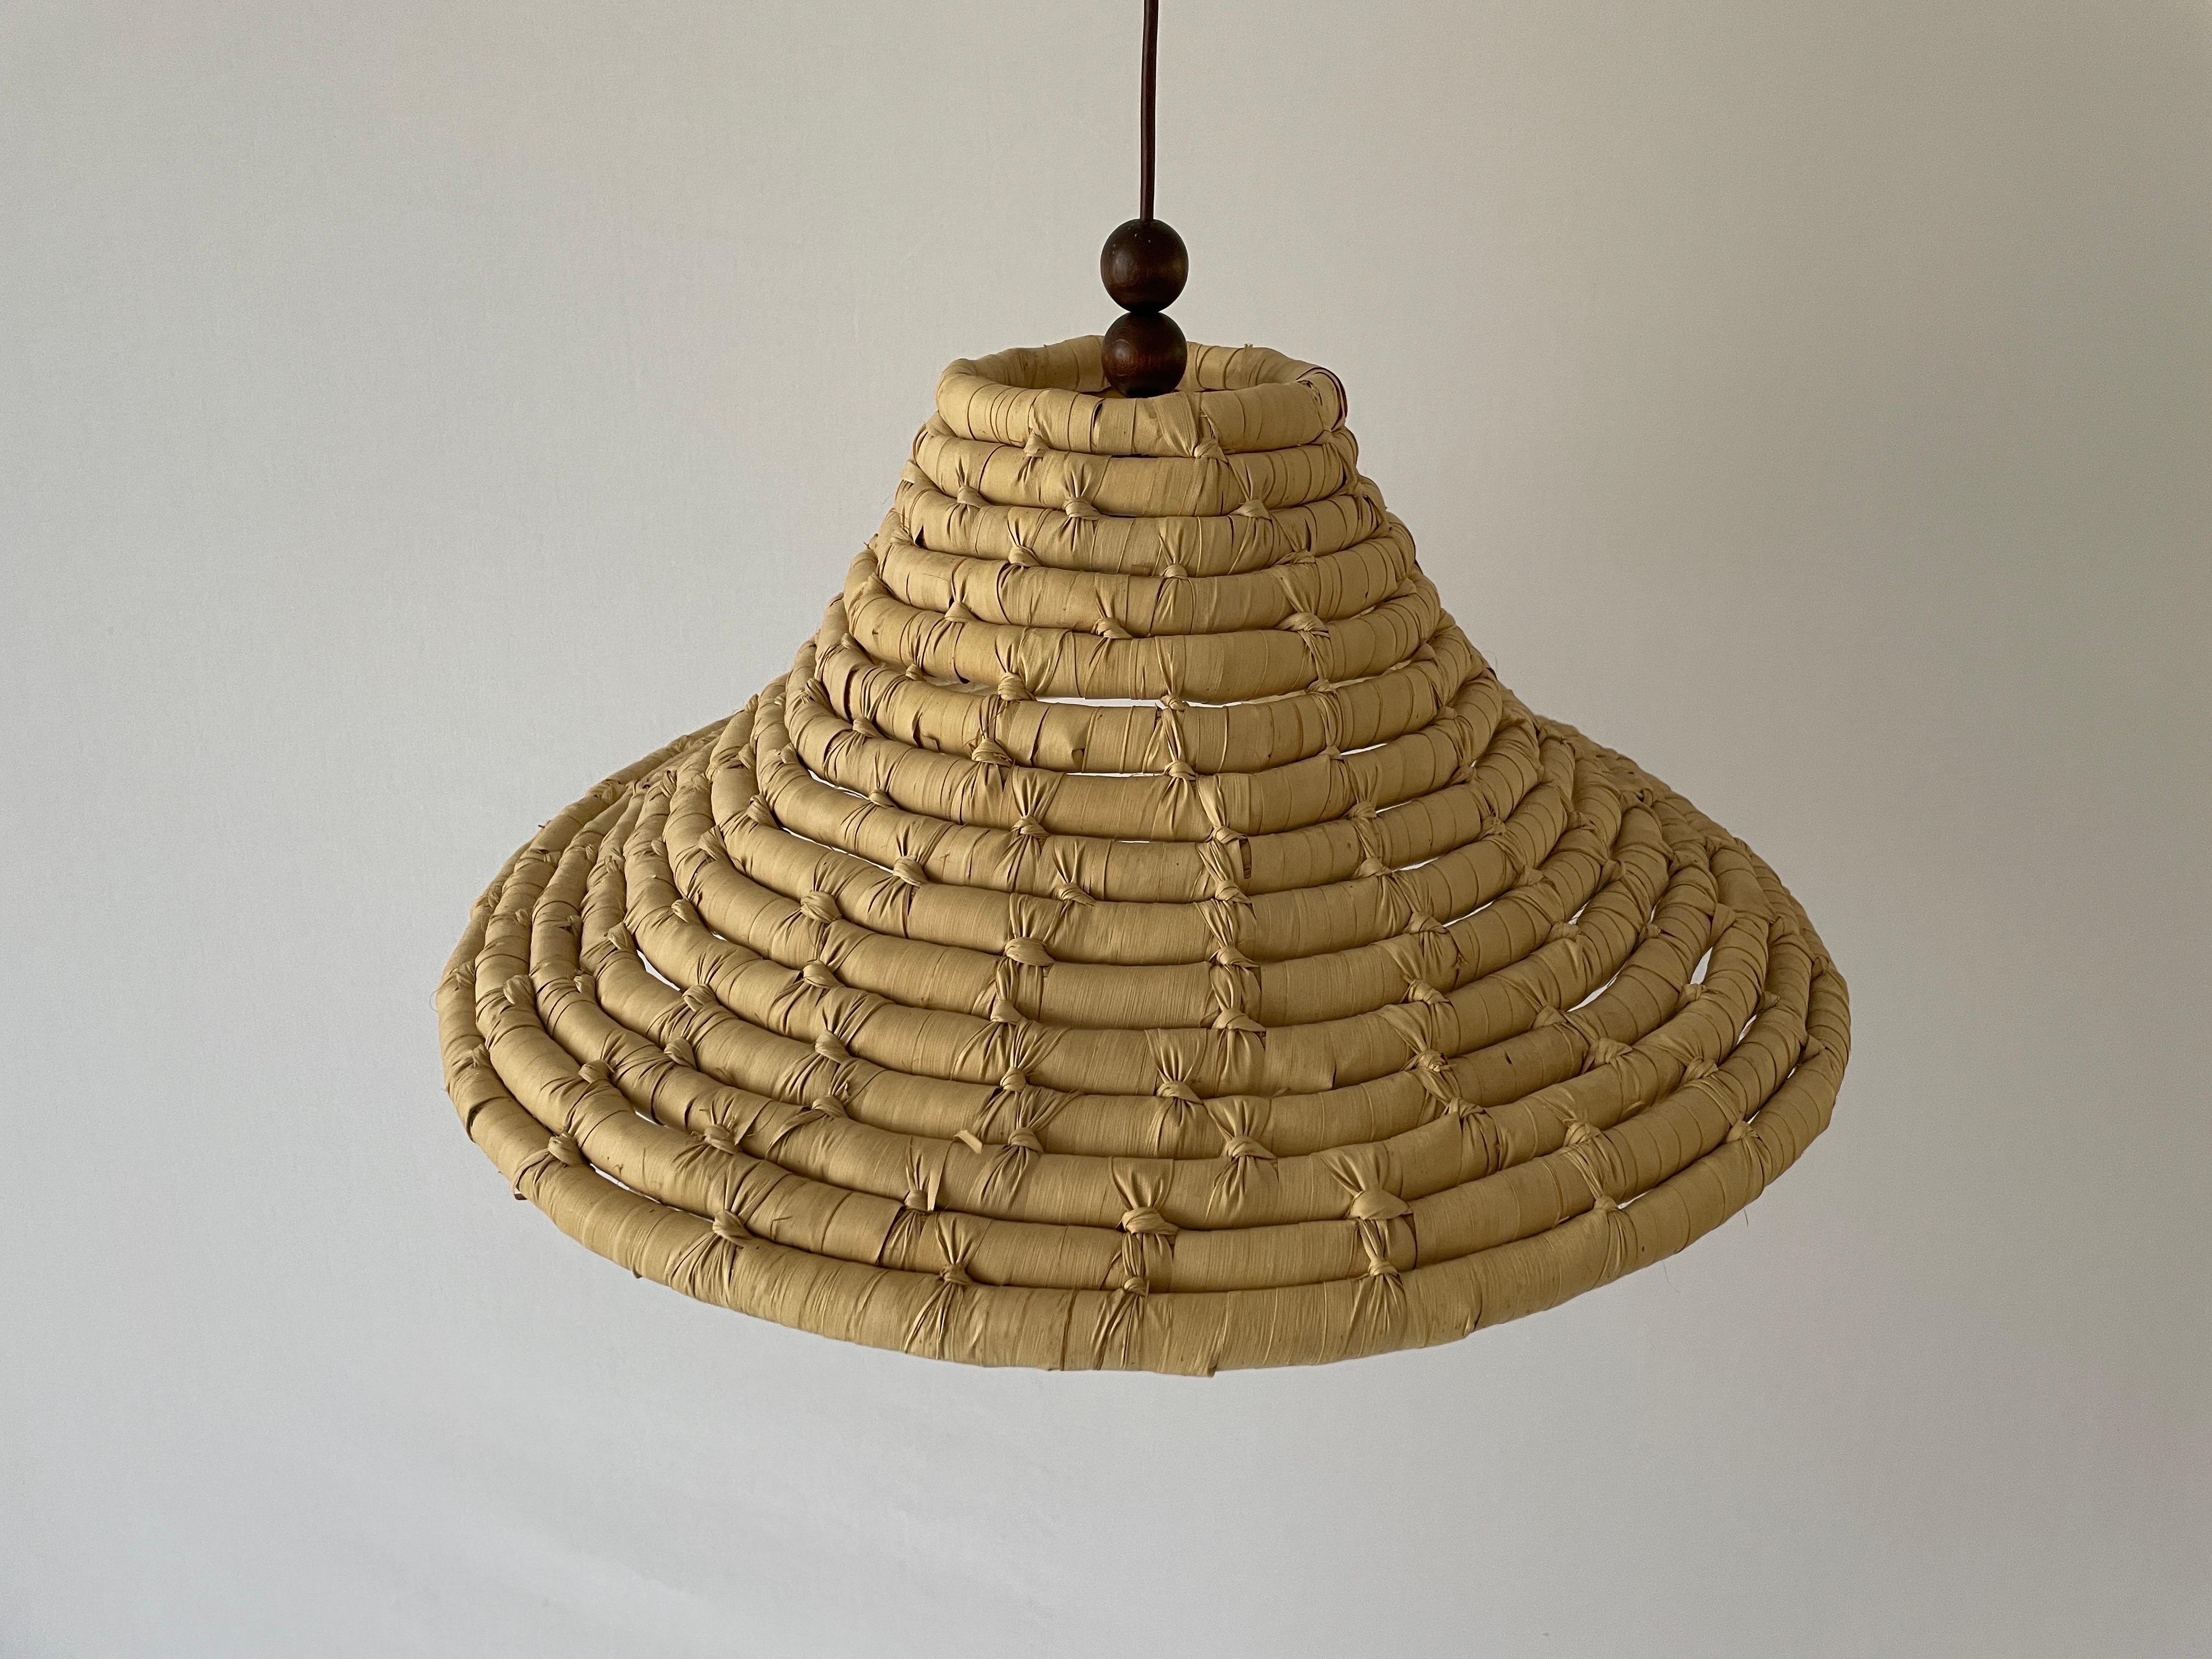 Unusual Large Made of Natural Plant Material Pendant Lamp, 1960s, Germany

This lamp works with E27 light bulb.

Measures: 
Height: 86 cm
Lampshade diameter and height: 60 cm and 26 cm

